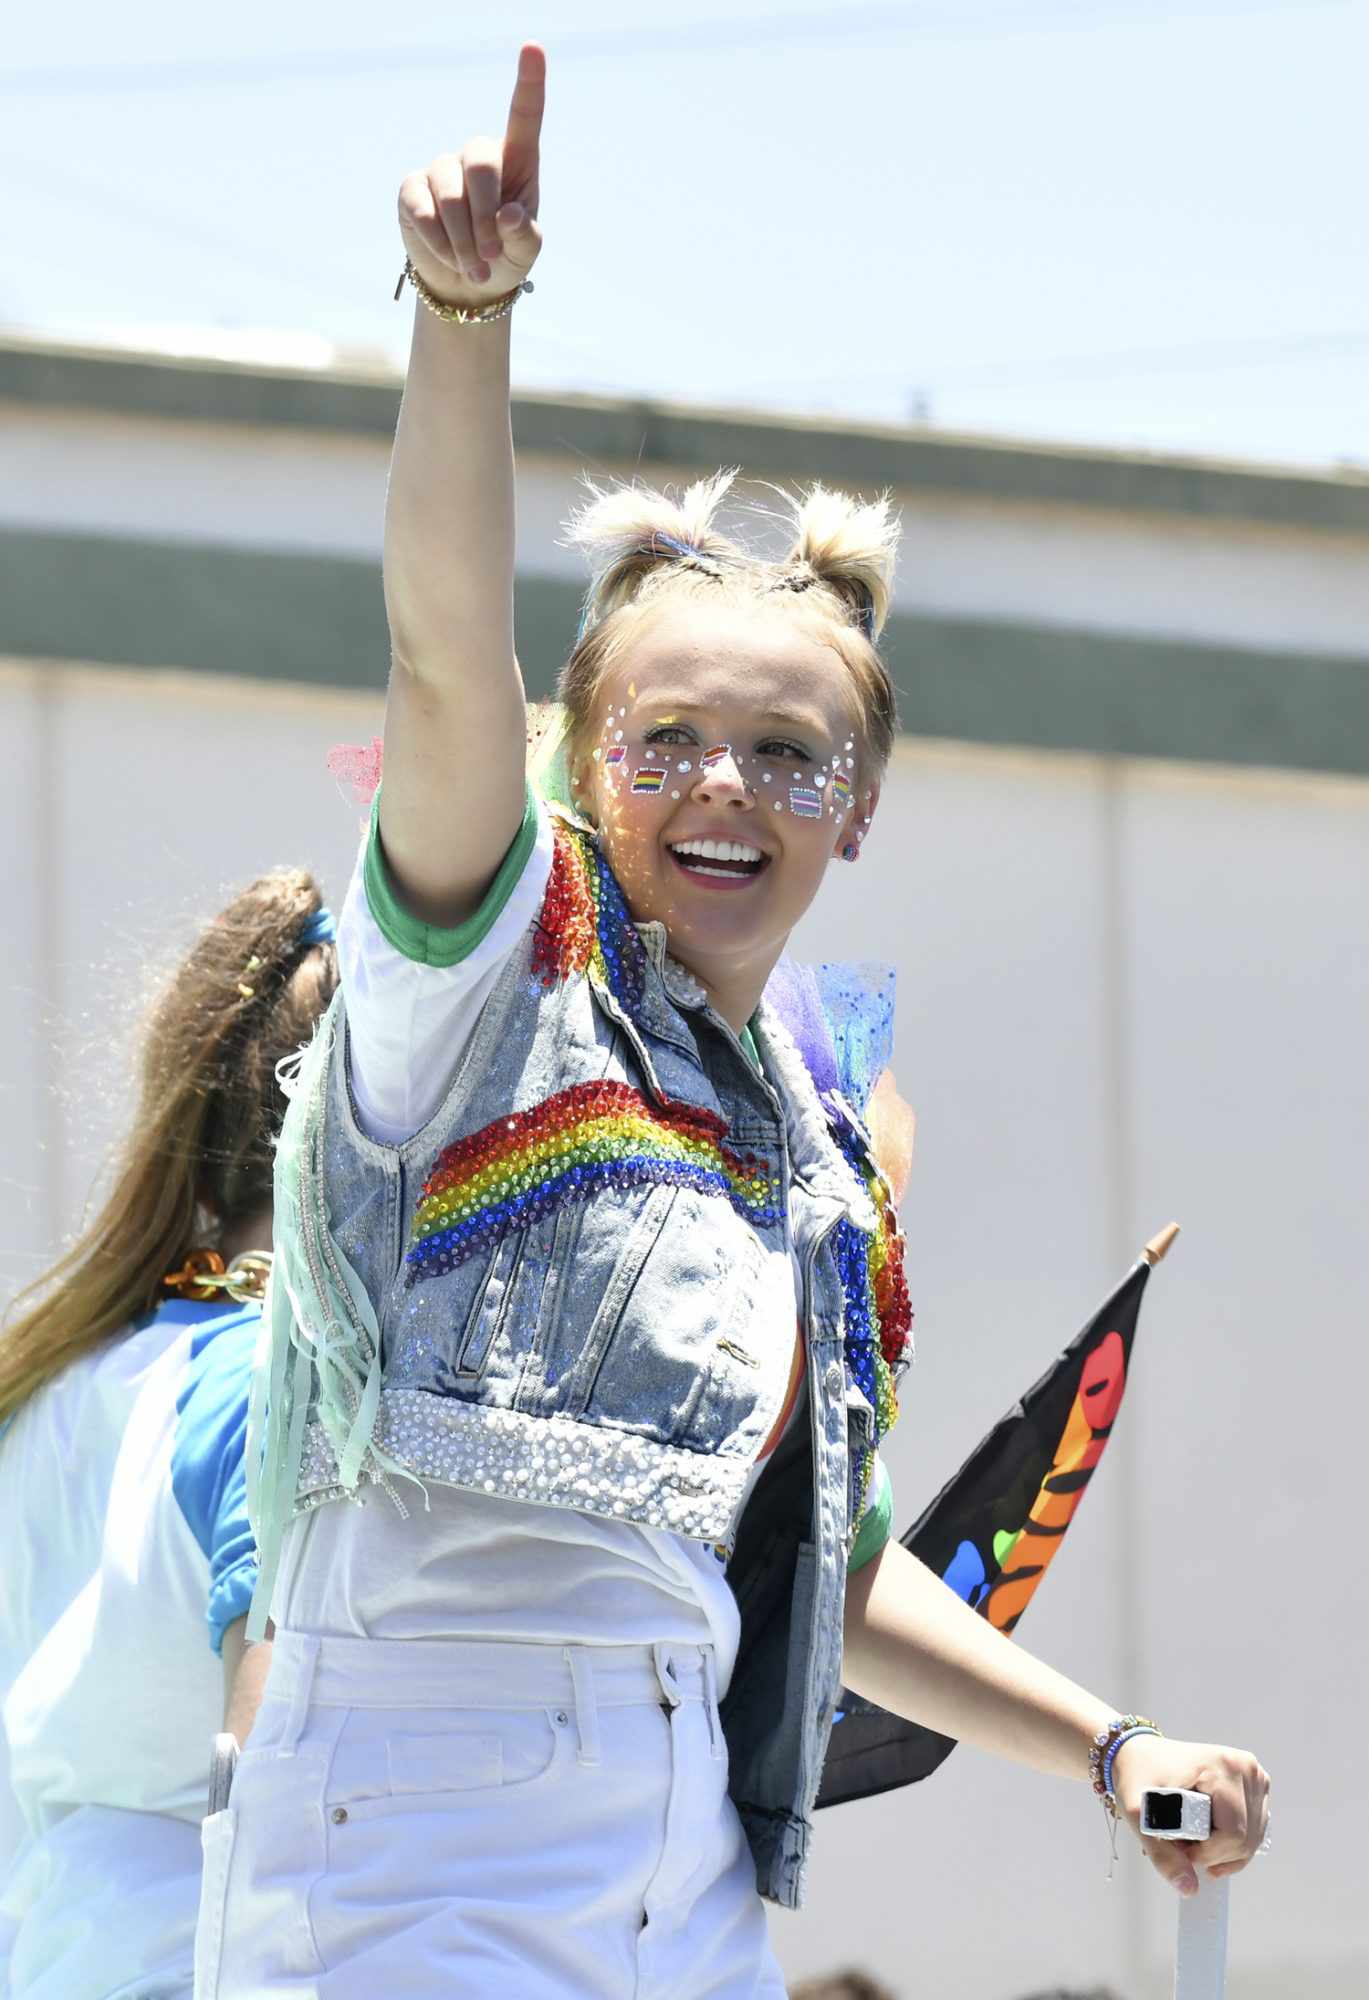 JoJo Siwa attends The City Of West Hollywood's Pride Parade